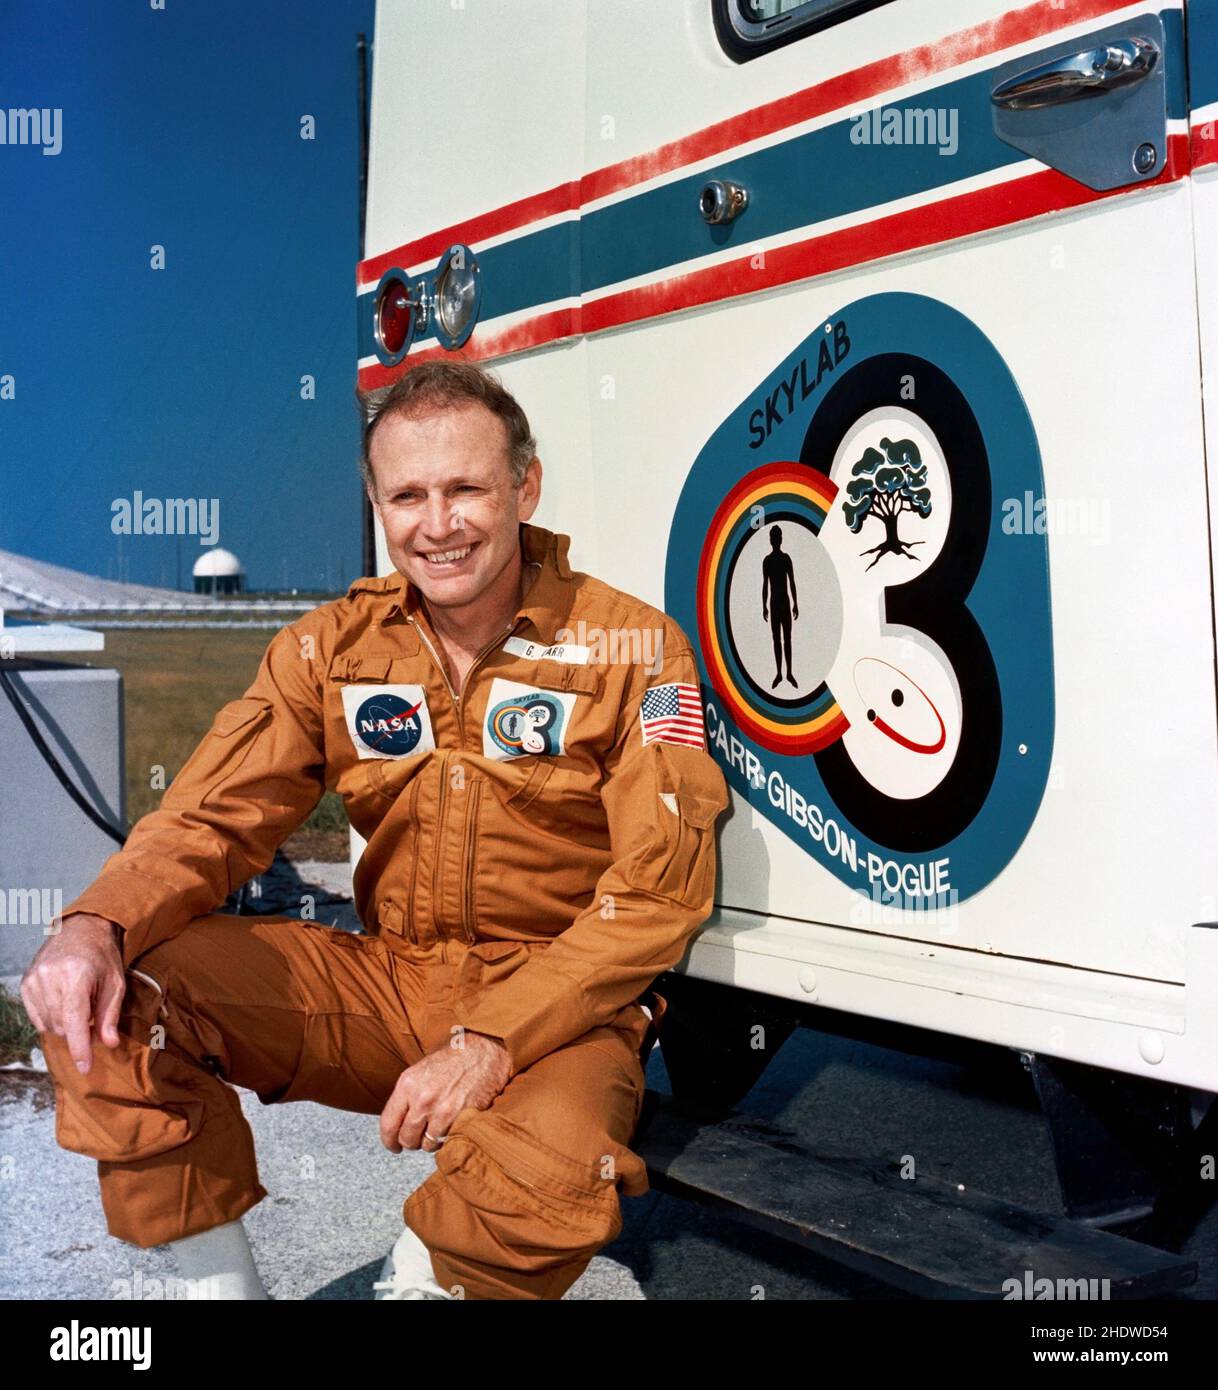 (8 Nov. 1973) --- Astronaut Gerald P. Carr, commander of the Skylab 4 mission, relaxes on the running board of the transfer van during a visit to the Skylab 4/Saturn 1B space vehicle at Pad B, Launch Complex 39, at the Kennedy Space Center, Florida. On the morning of the launch the transfer van will transport astronauts Carr; William R. Pogue, pilot; and Edward G. Gibson, science pilot, from the suiting building to Pad B. Skylab 4, the third and last visit to the Skylab space station in Earth orbit, will return additional information the Earth and sun, as well as provide a favorable location f Stock Photo